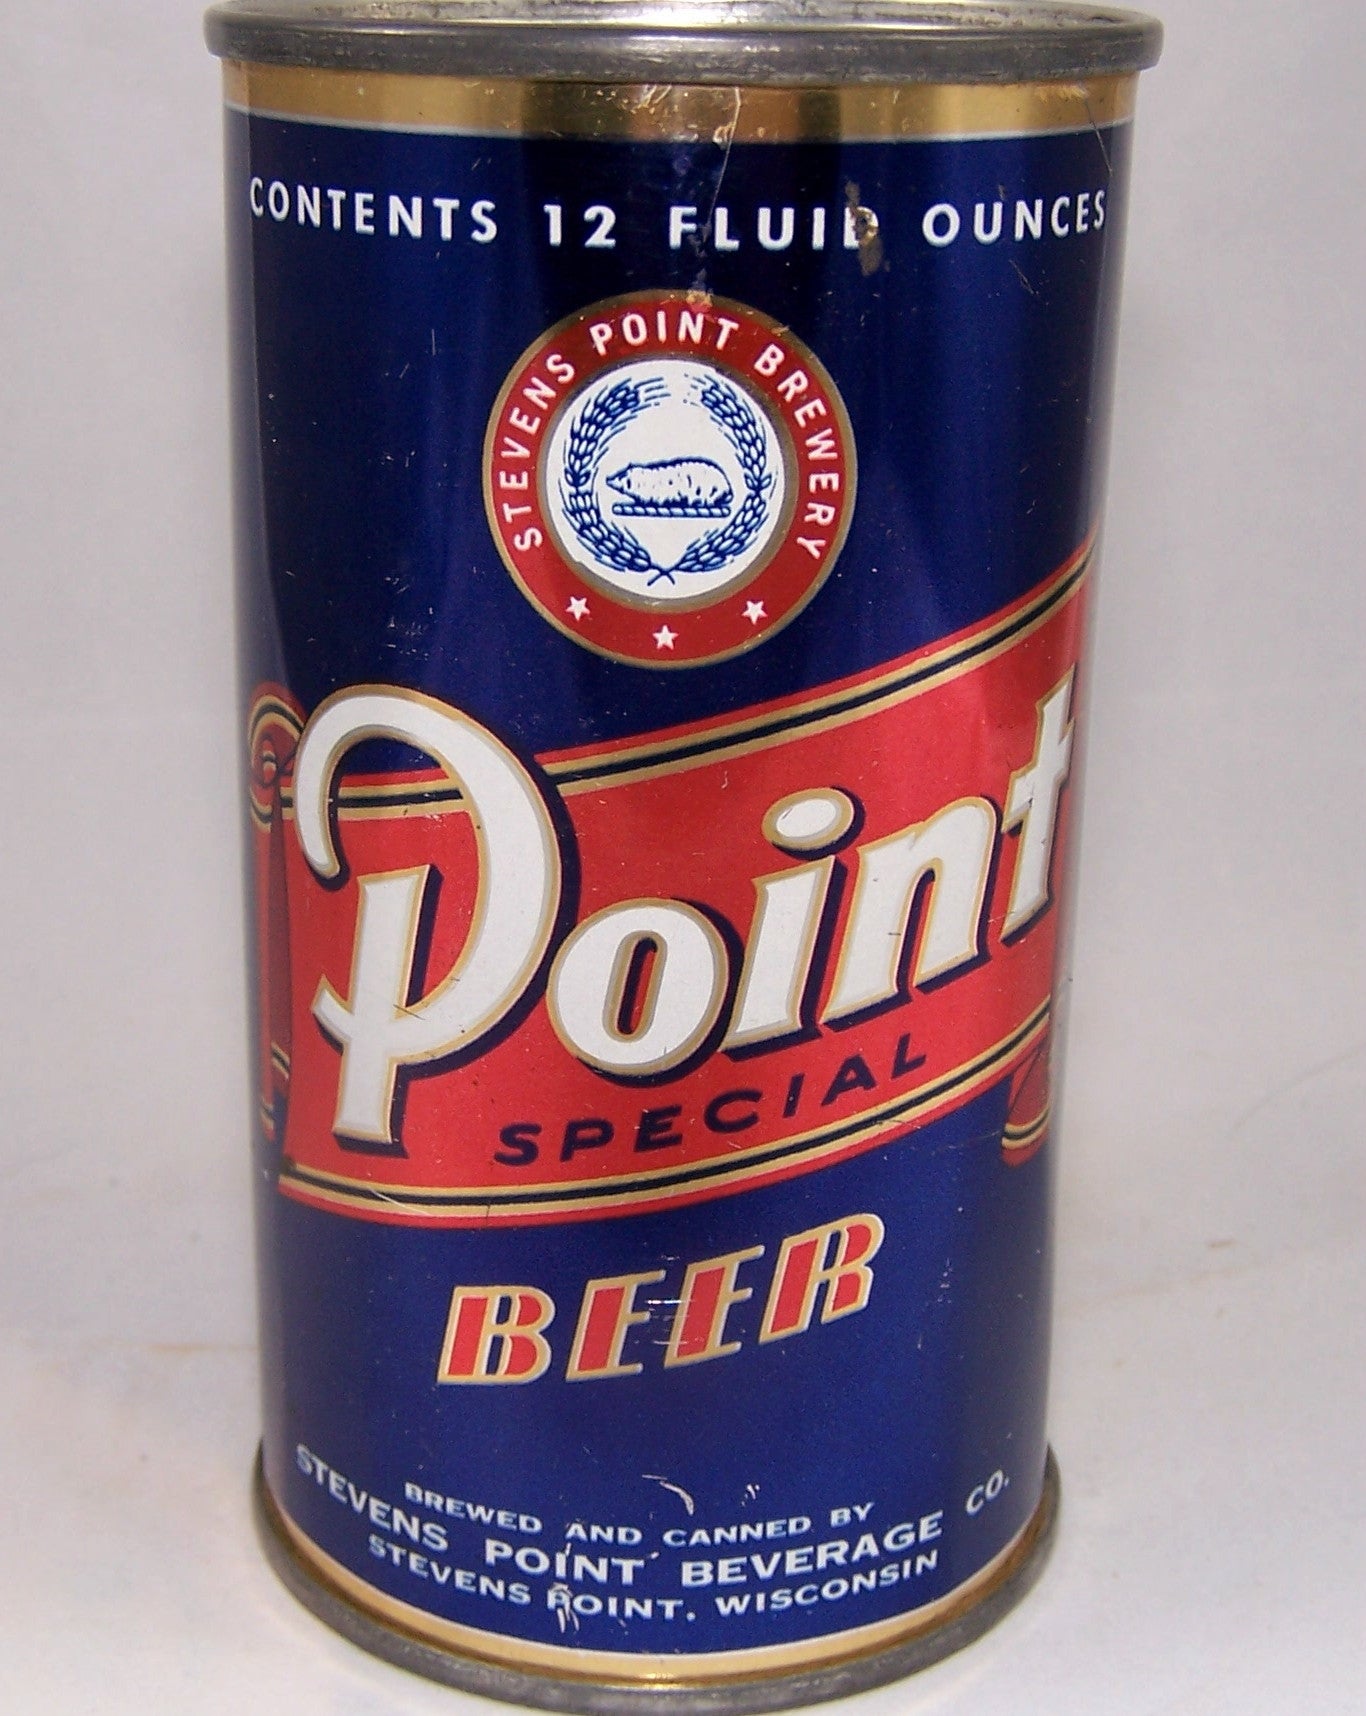 Point Special Beer, USBC 116-18 (ROLLED) Grade 1/1- sold on 04/16/16